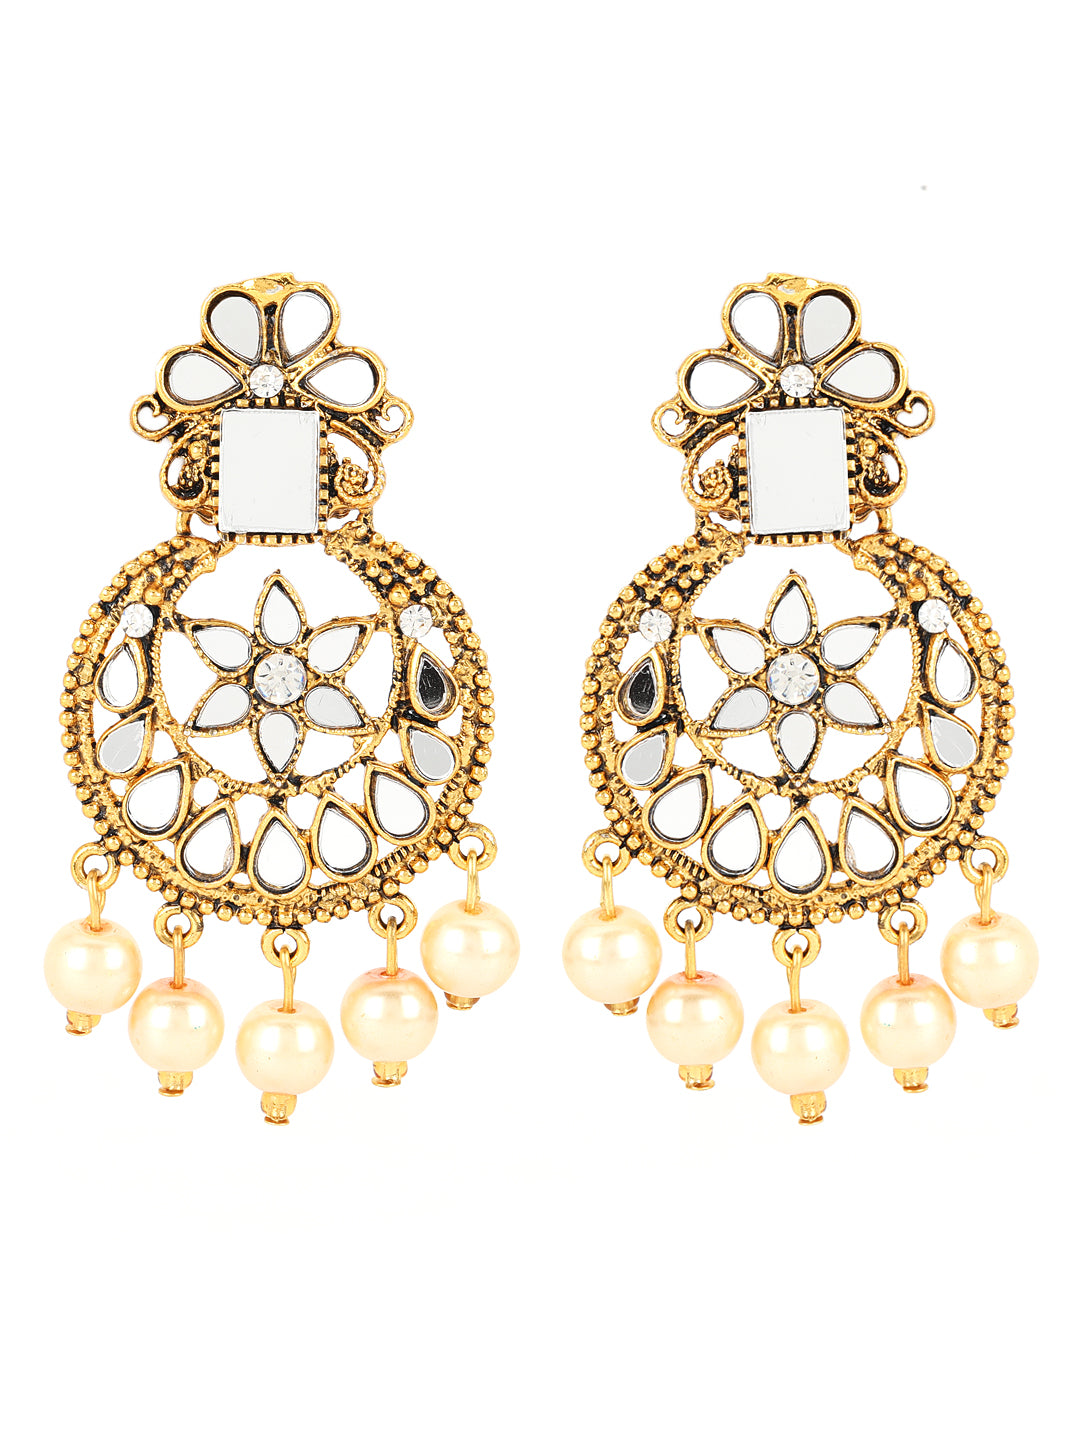 Gold-Plated White Coloured Stone-Studded & Cream Pearl Beaded Handcrafted Jewellery Set - Jazzandsizzle